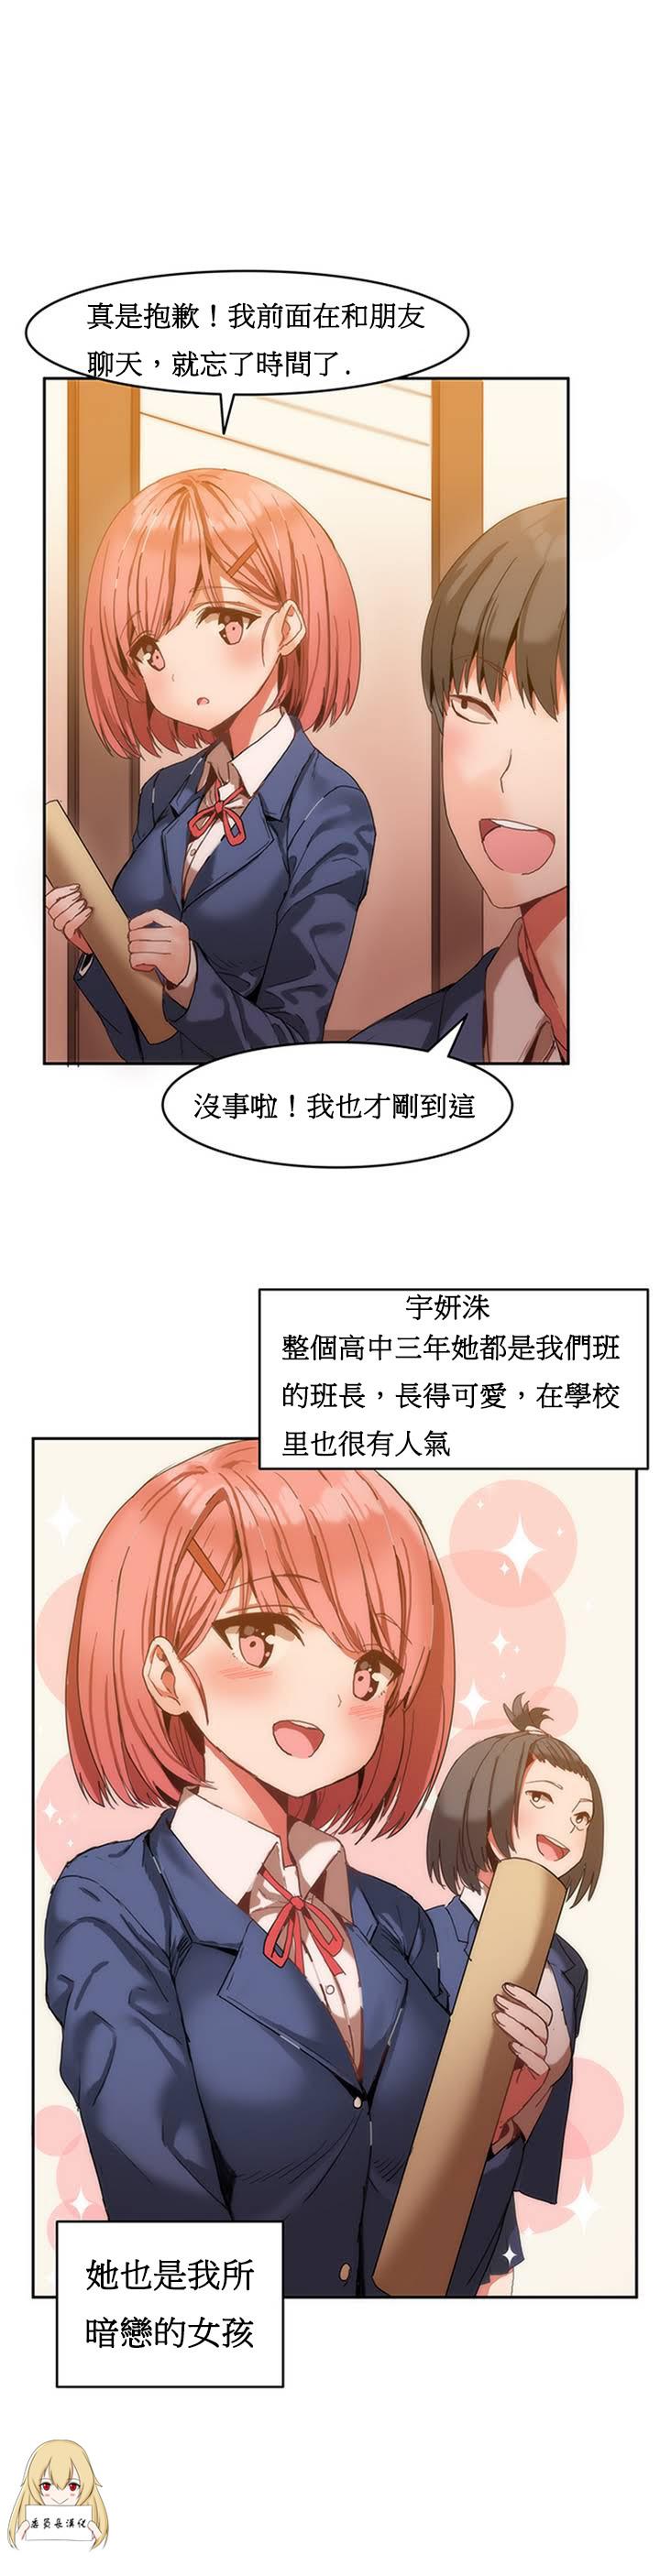 Perverted Hahri's Lumpy Boardhouse Ch. 1~12【委員長個人漢化】（持續更新） Desperate - Page 5